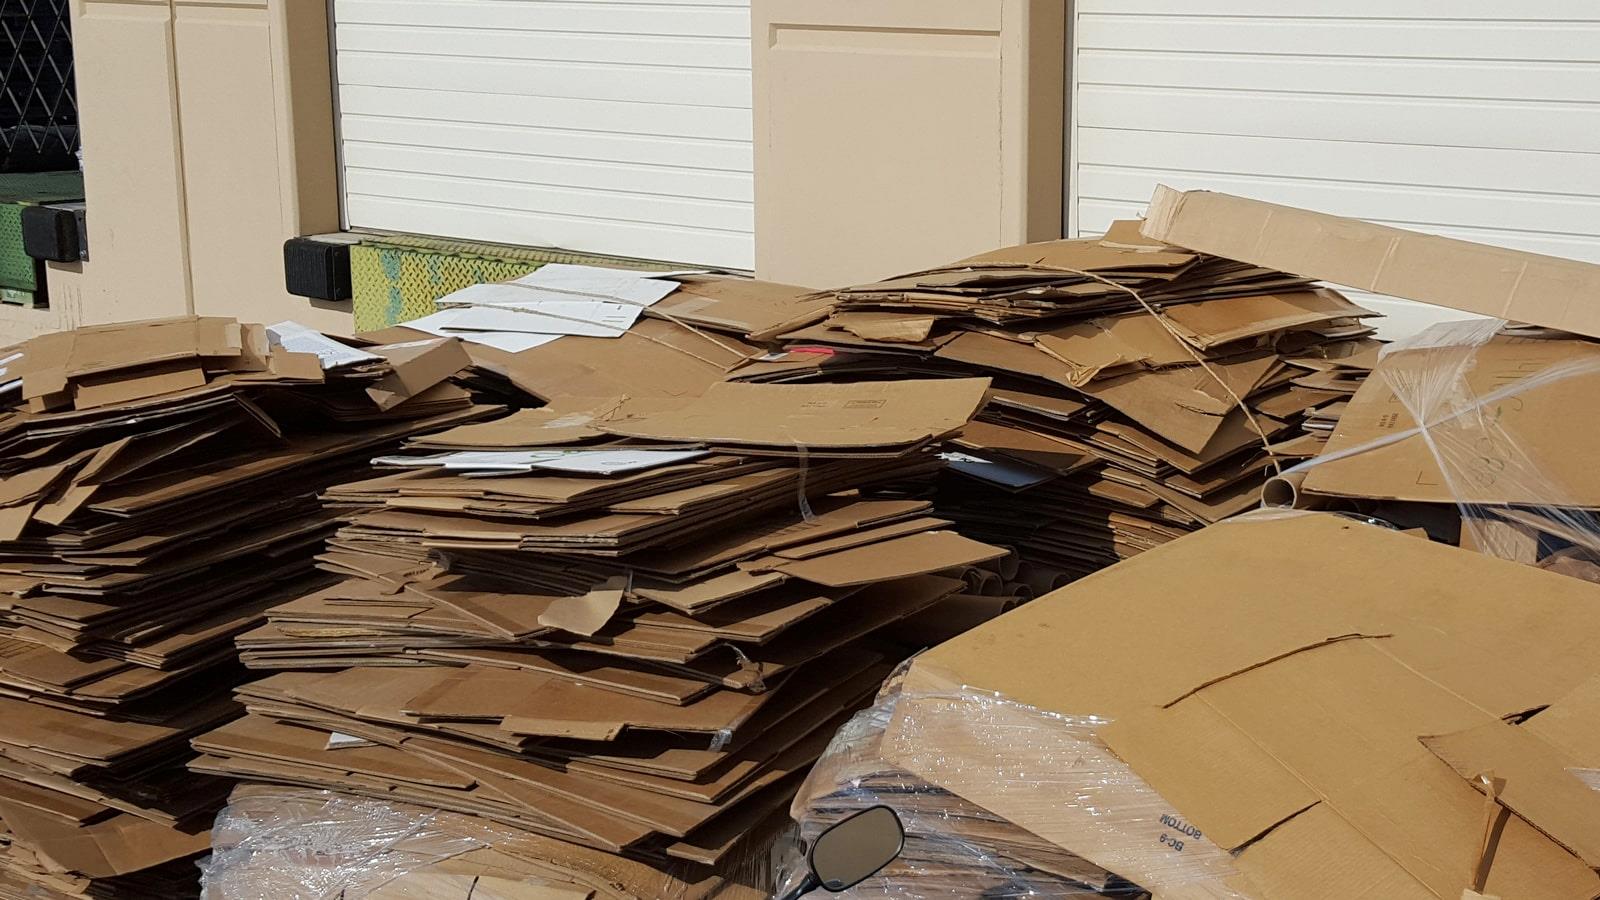 Stacks of cardboard outside of factory